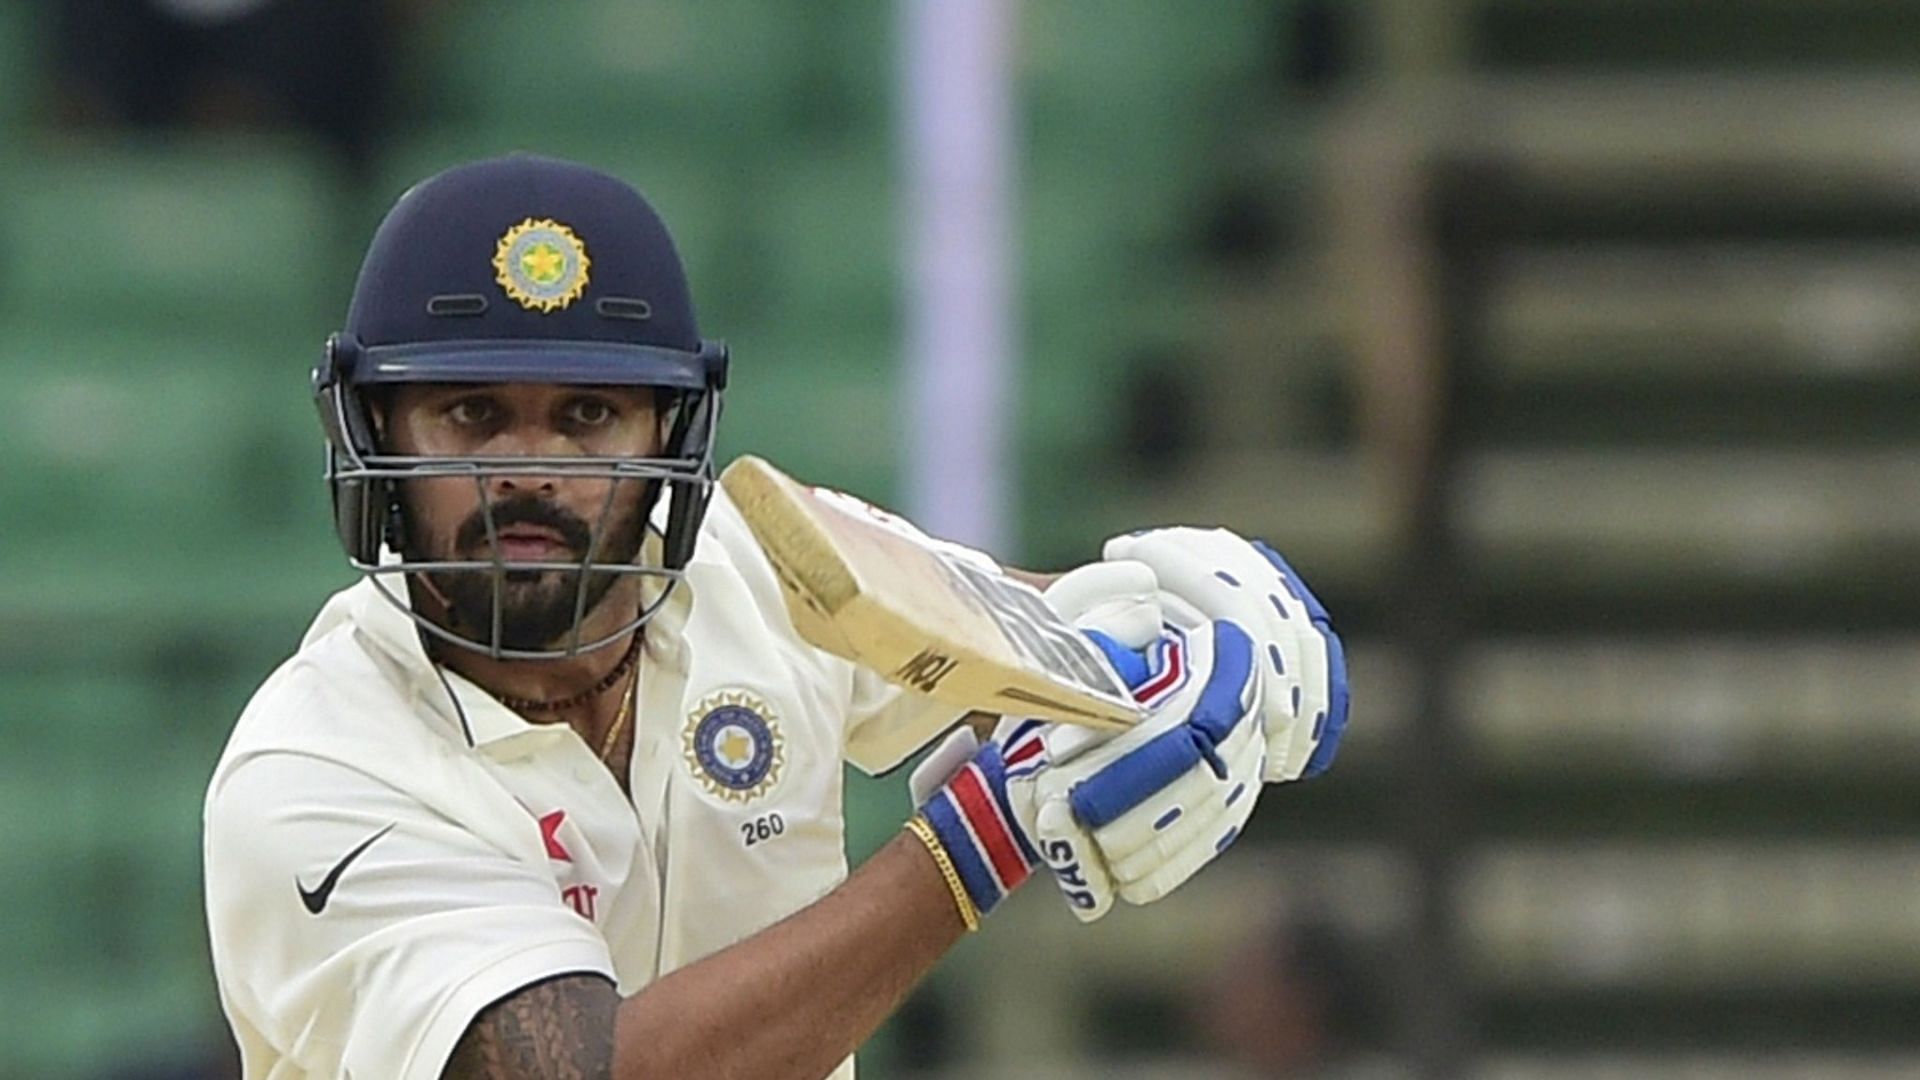 Murali Vijay played a fine knock in Durban against a dangerous bowling attack in tough conditions